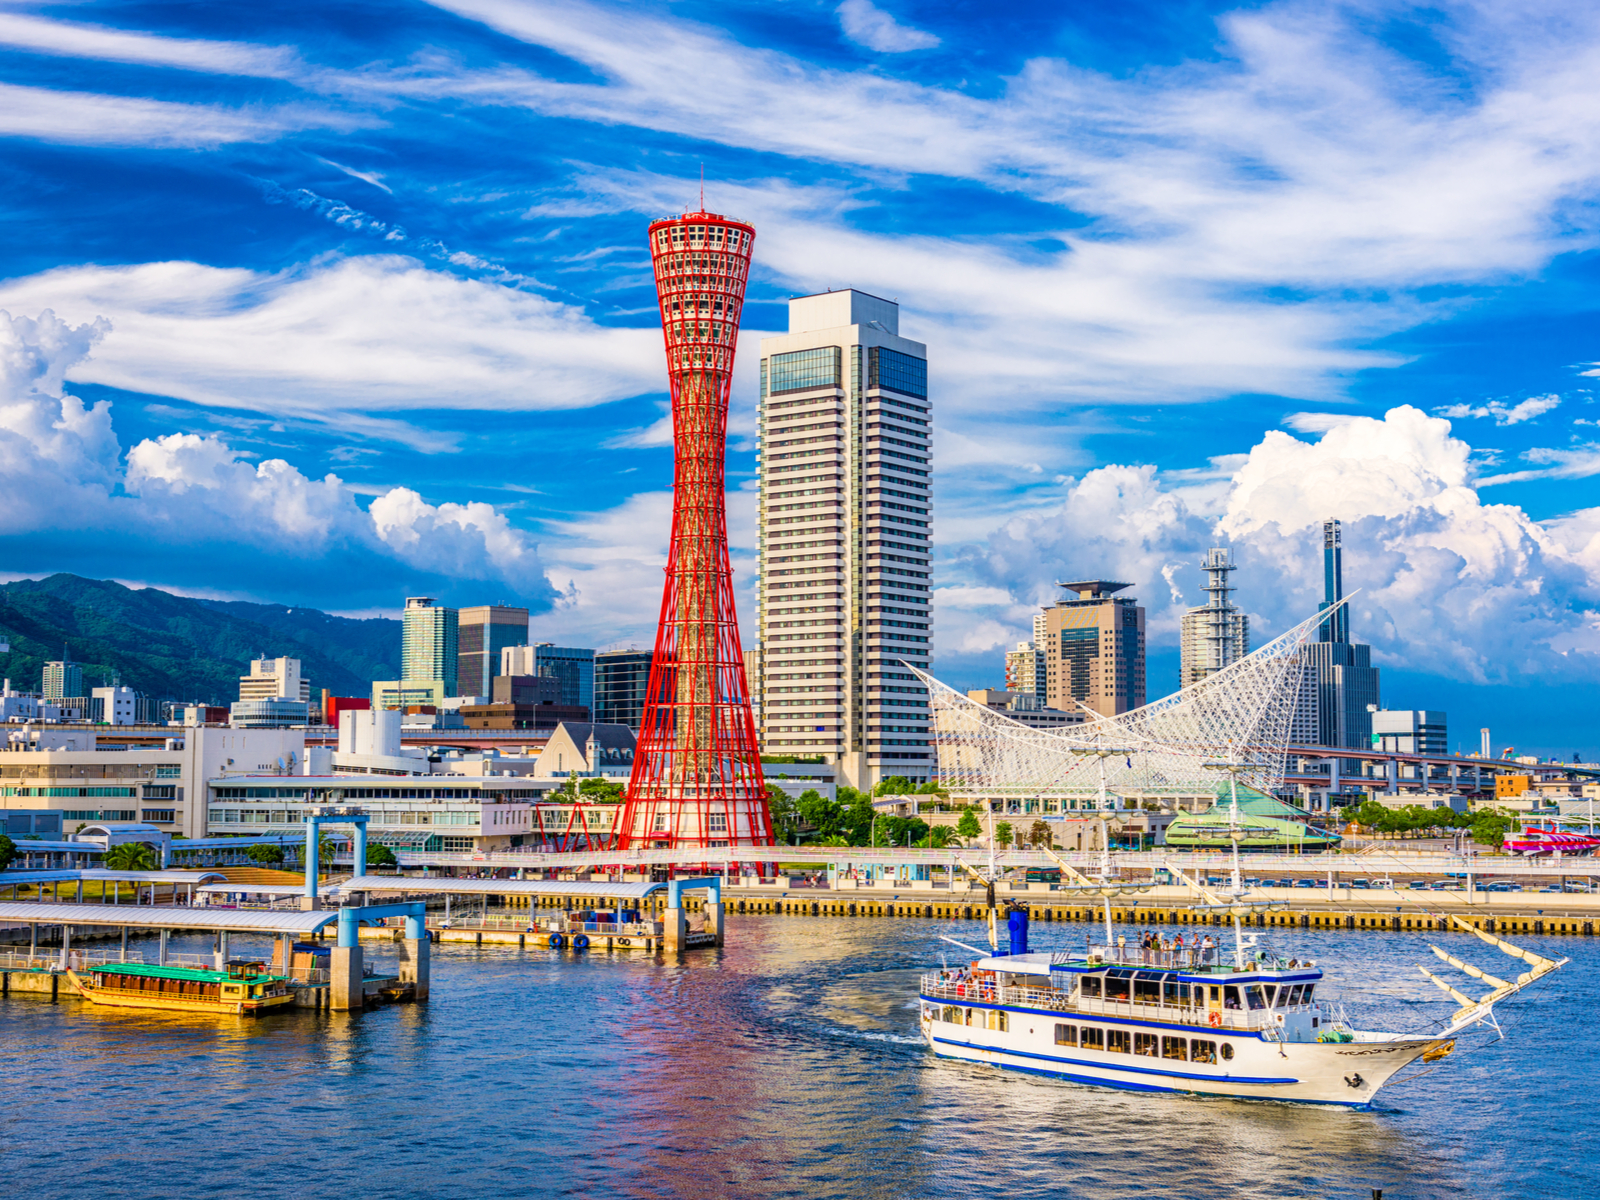 Water view of Kobe, a must-visit place in Japan, on a clear day with only a few clouds in the sky